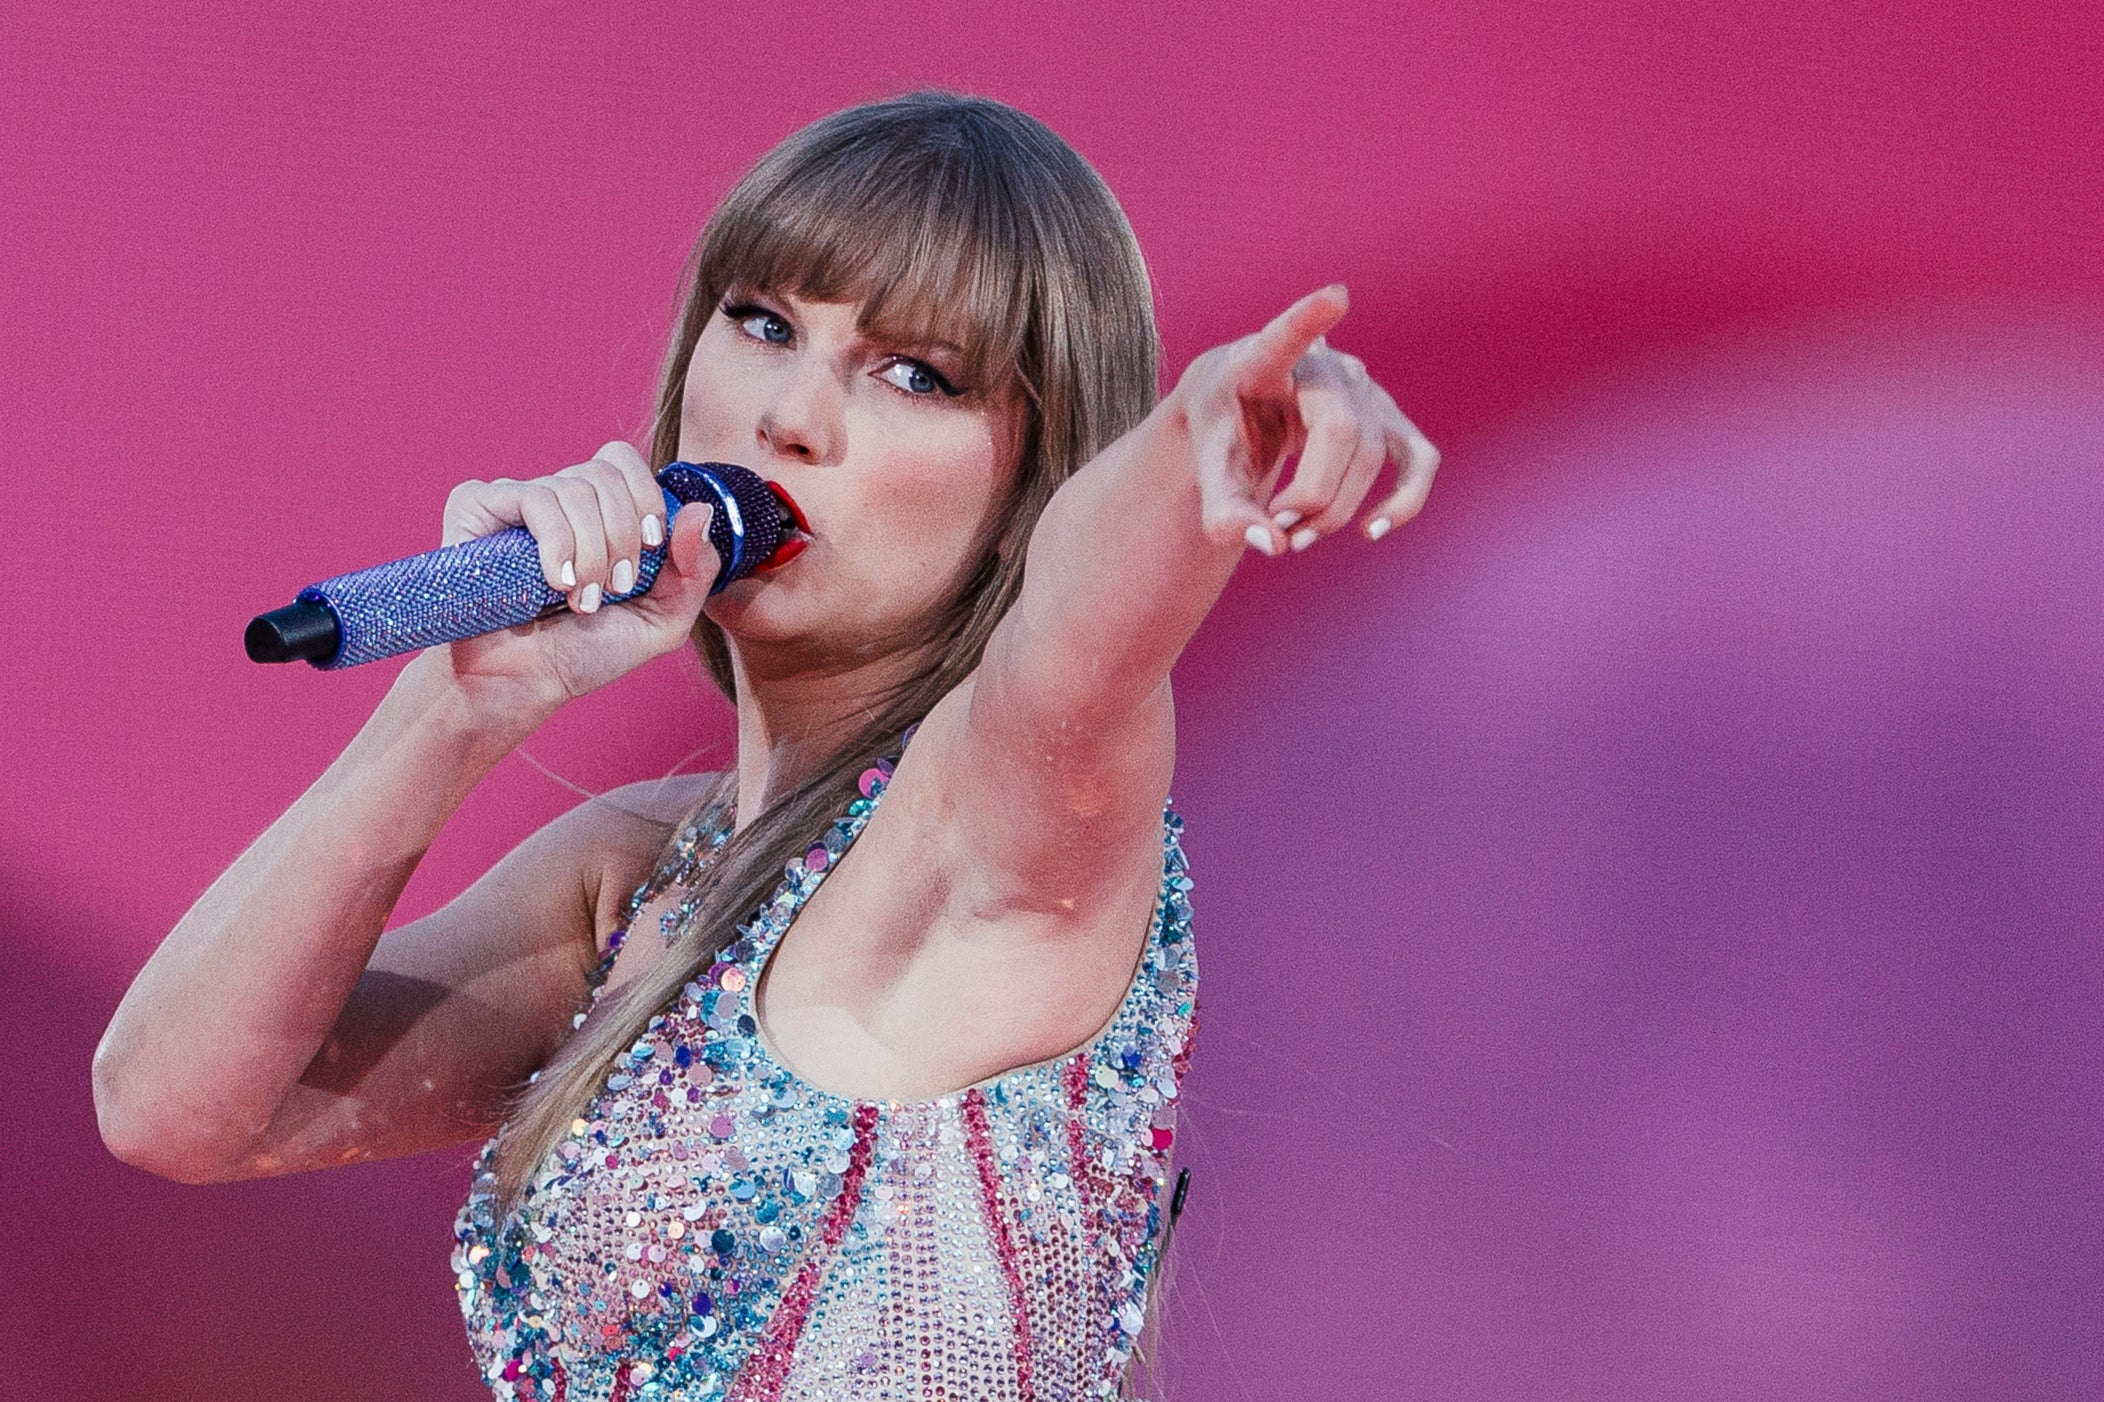 Taylor Swift told Trump that Americans would ‘vote you out in November’ ahead of the 2020 election